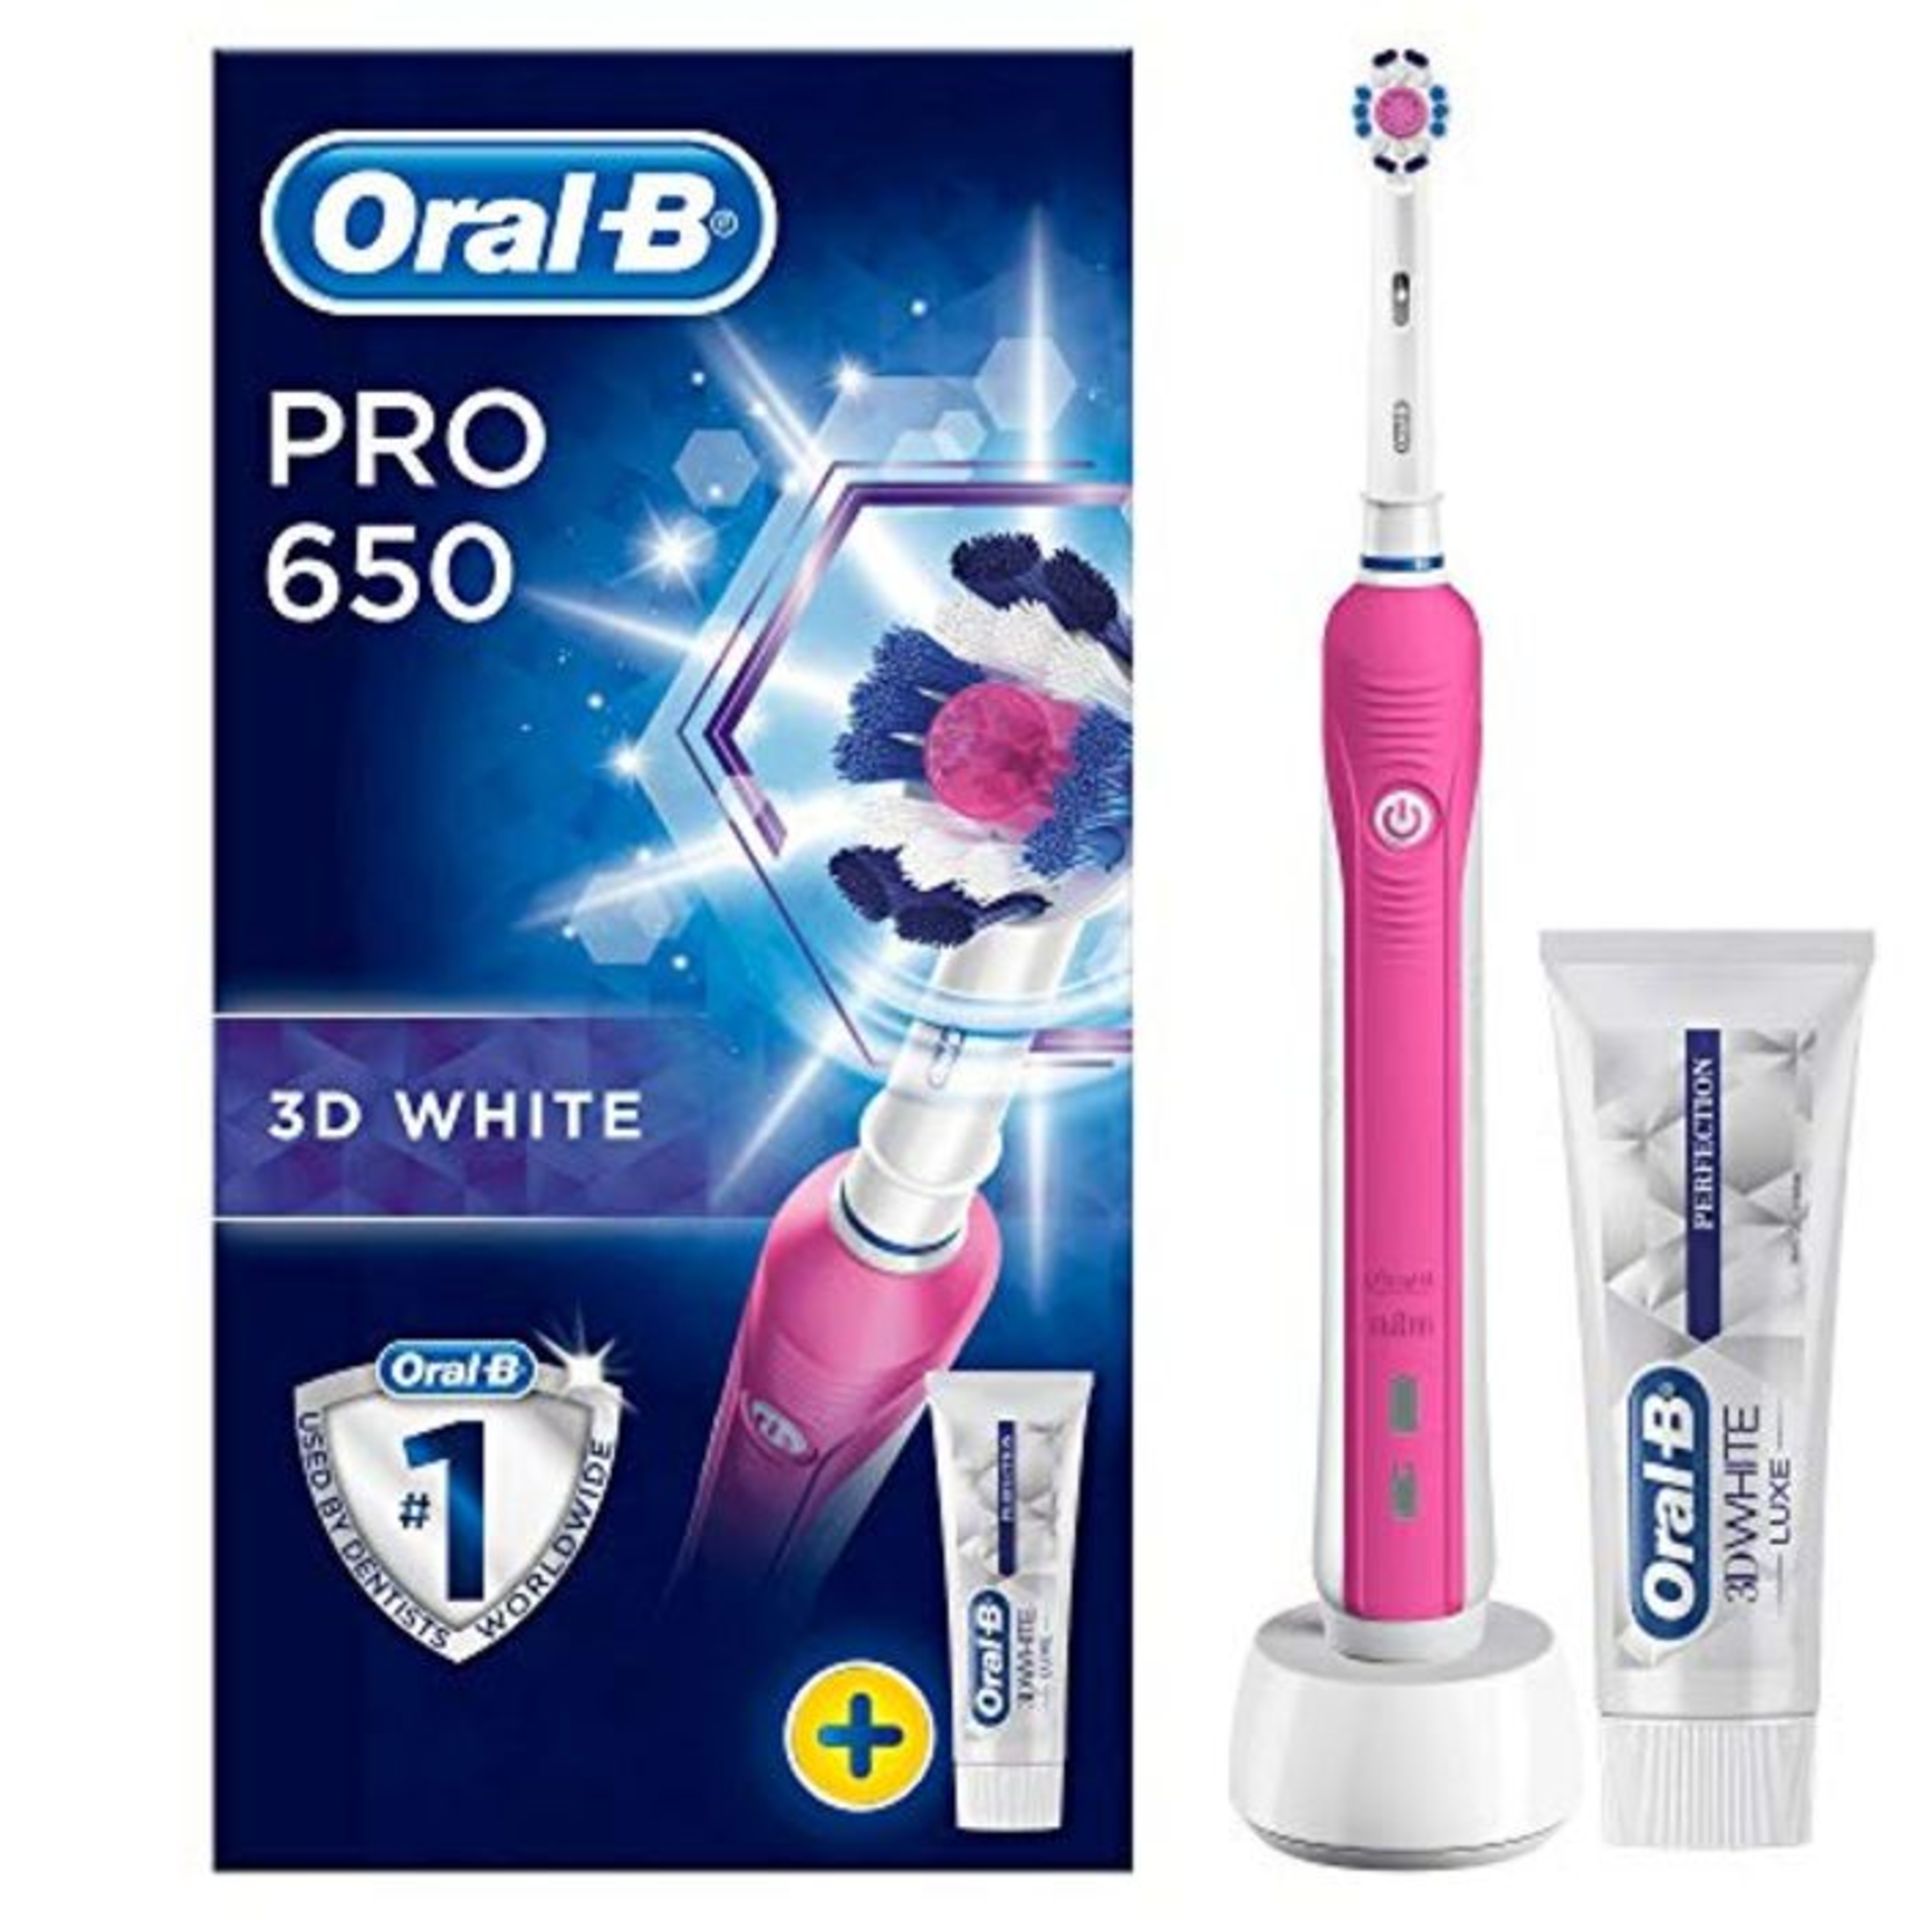 Oral-B Pro 650 3D White Electric Rechargeable Toothbrush Powered by Braun, 1 Pink Hand